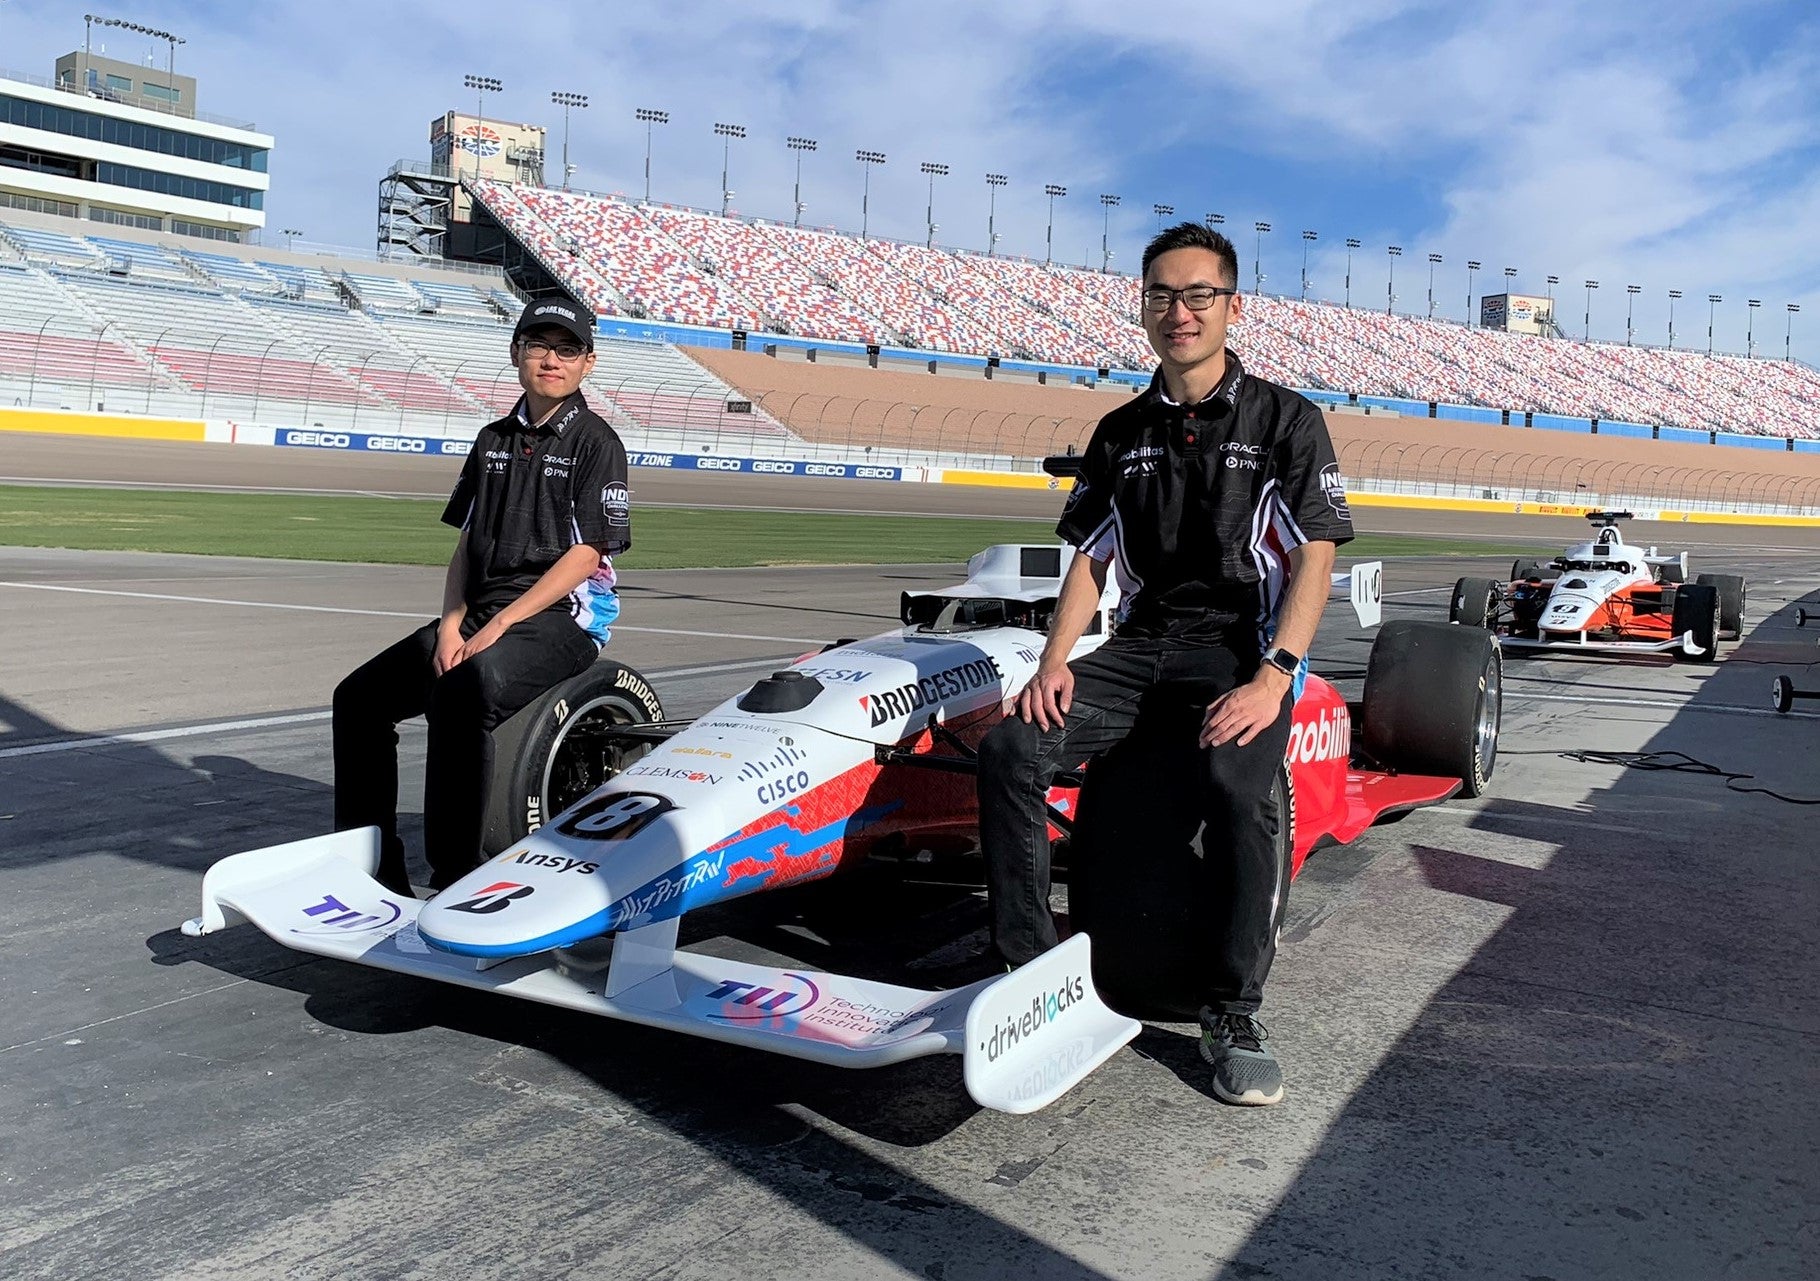 Ben Zhang and Brian Mao with their car in Las Vegas.